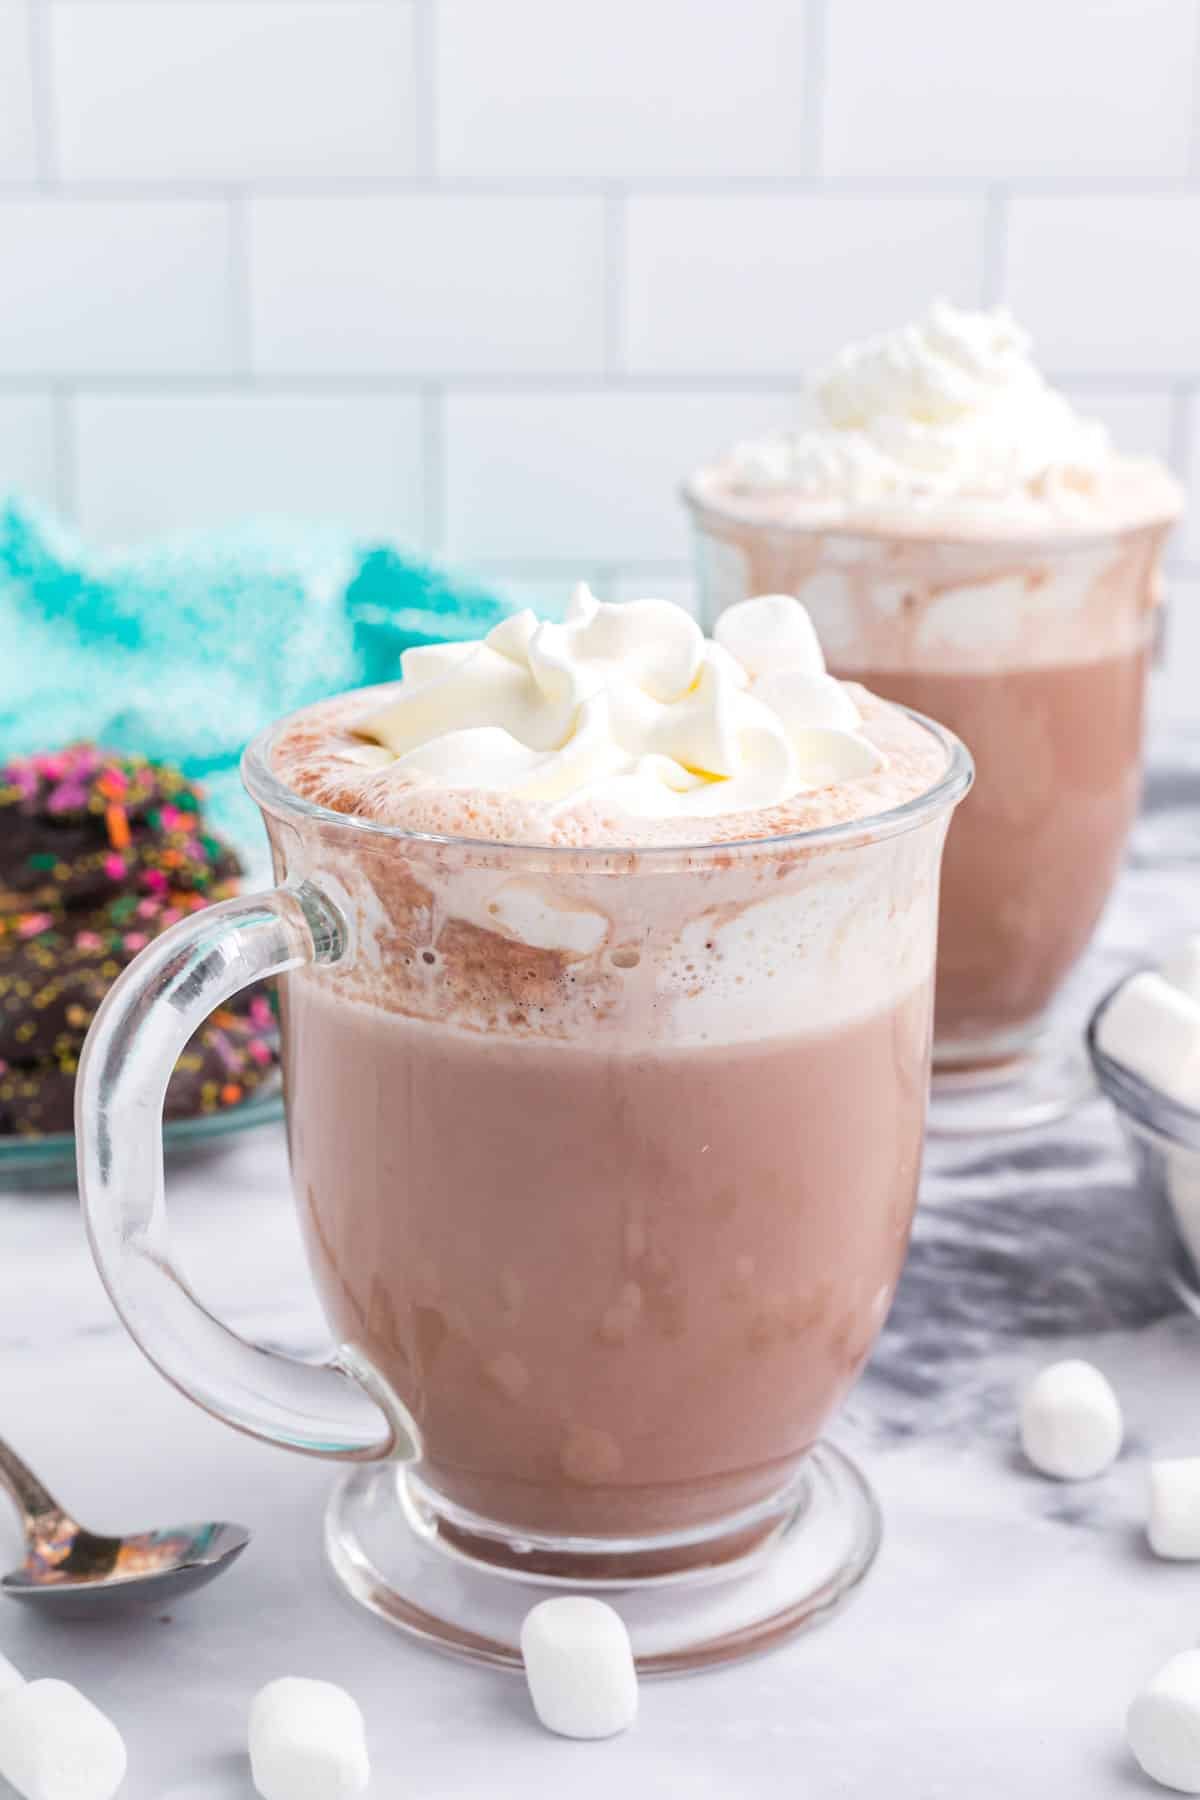 a mug of hot chocolate topped with whipped cream.